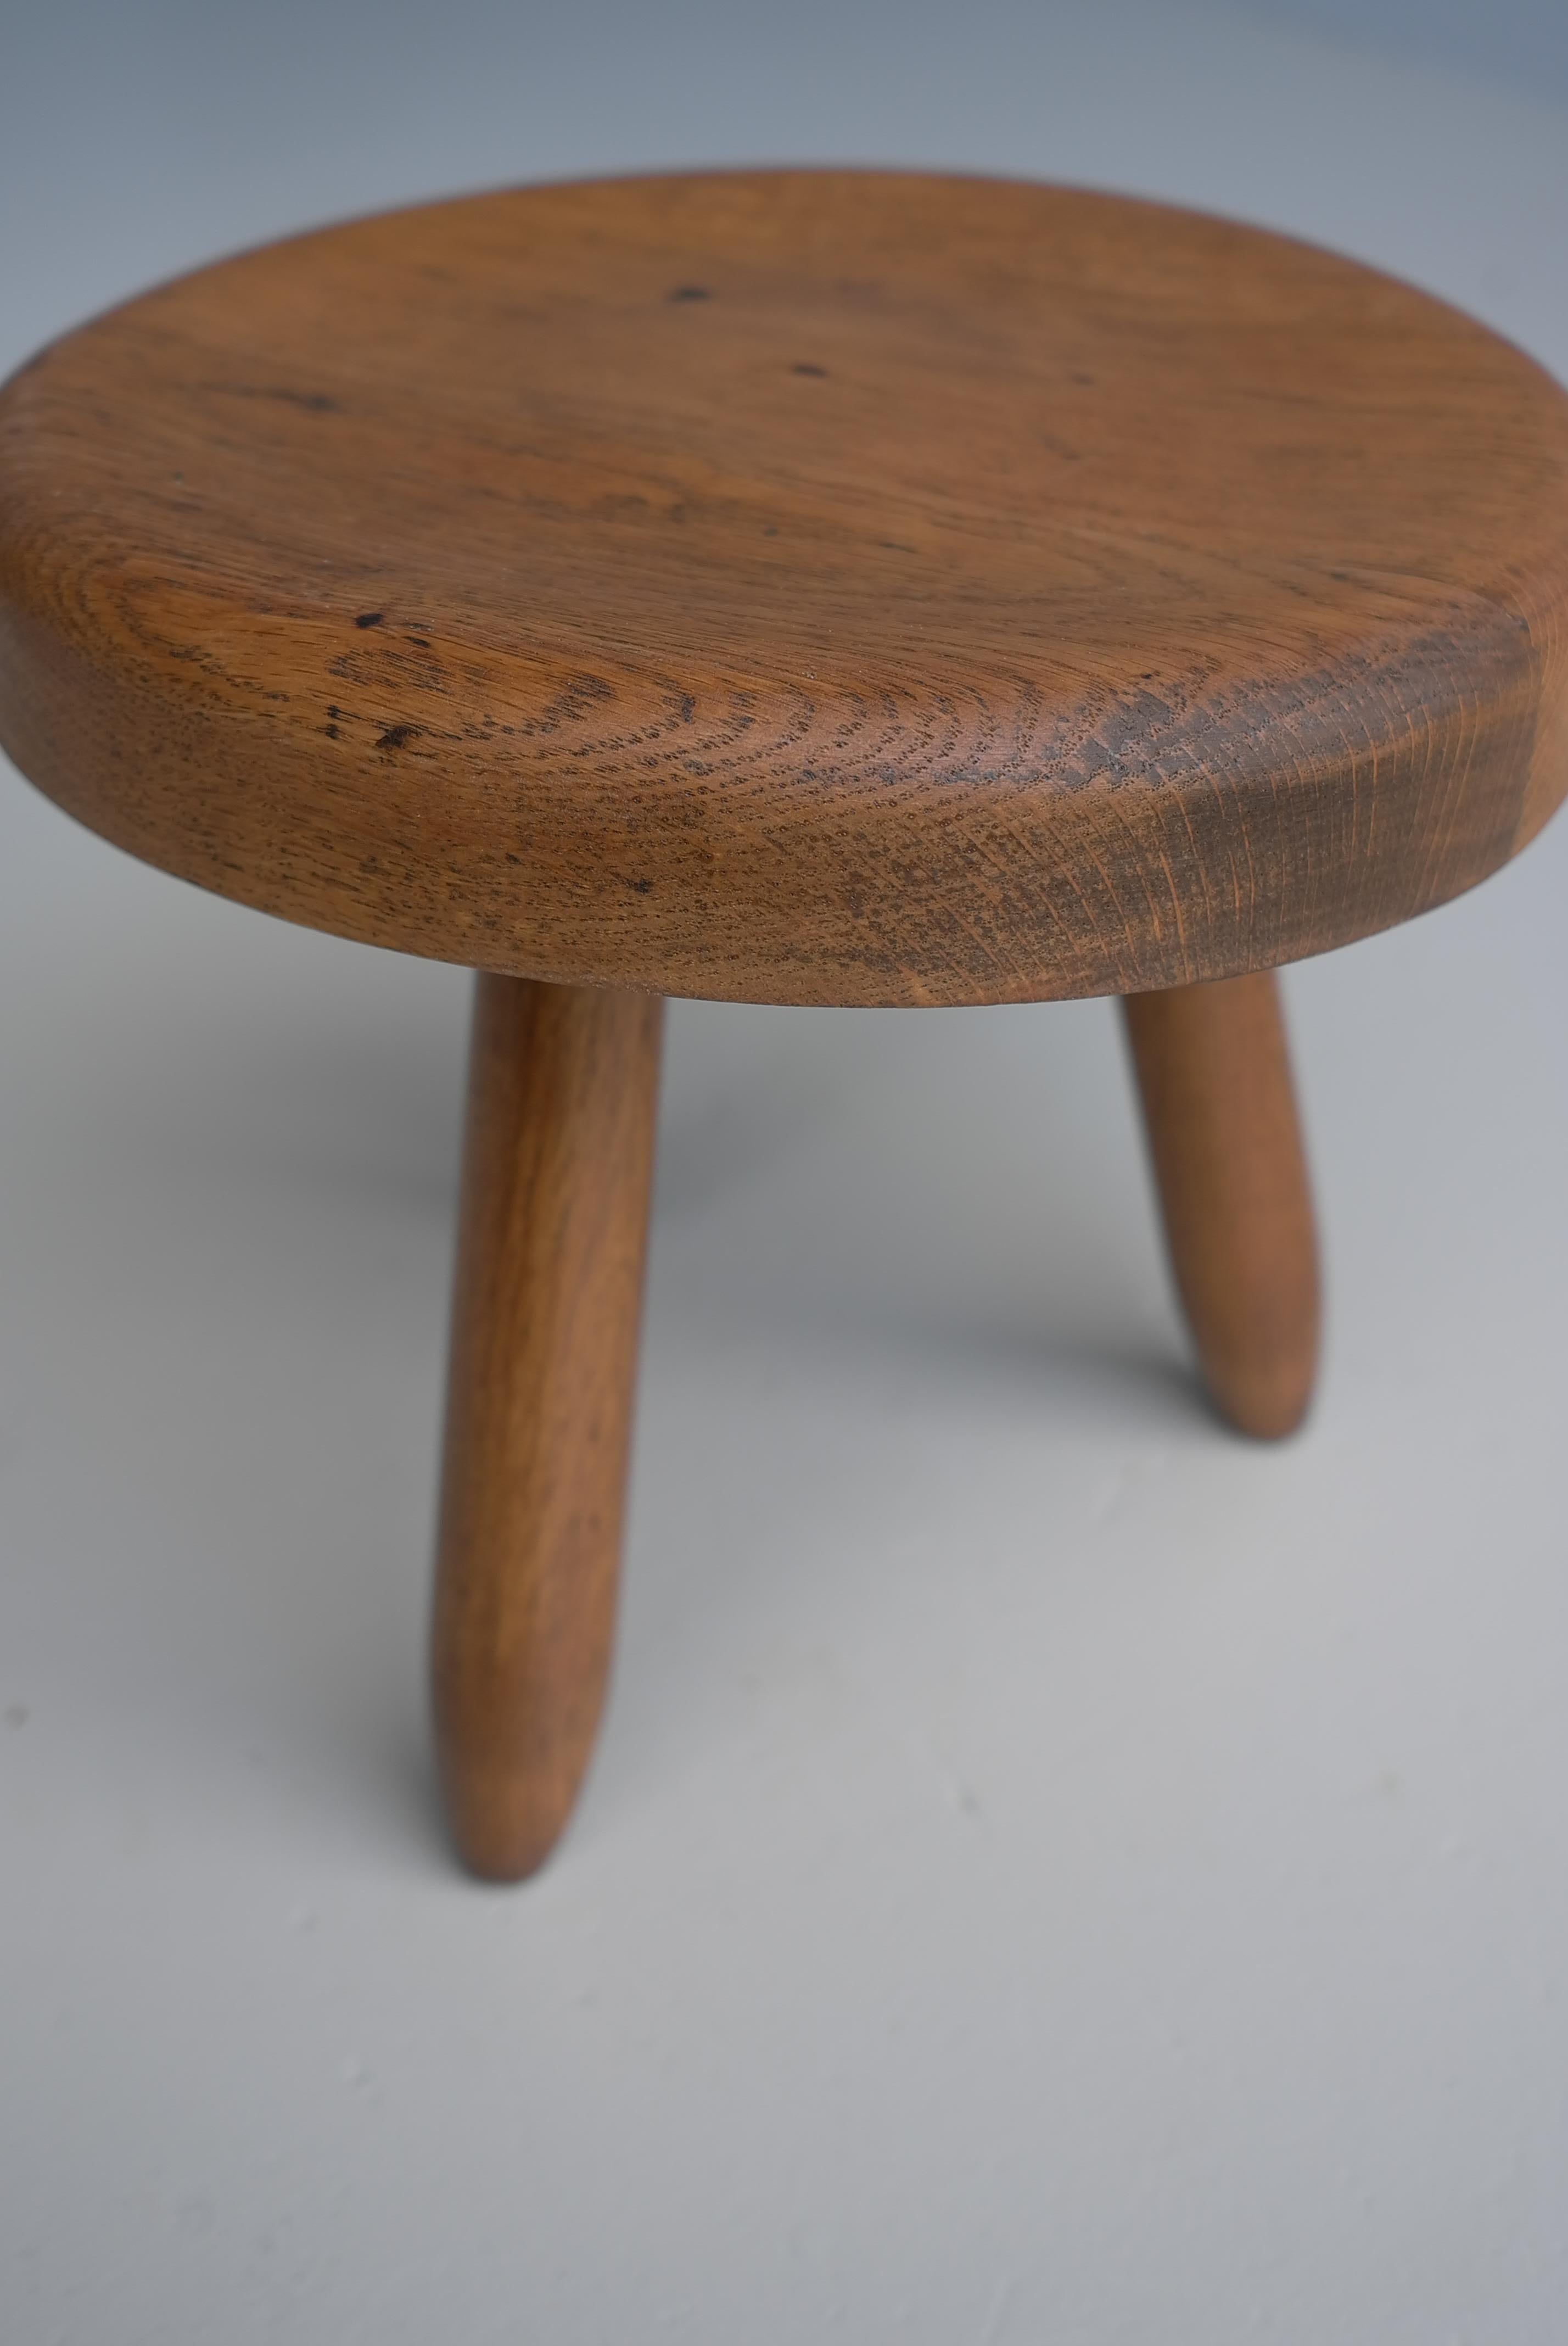 Solid Oak ' Berger' Stool in Style of Charlotte Perriand, France, 1950's For Sale 3